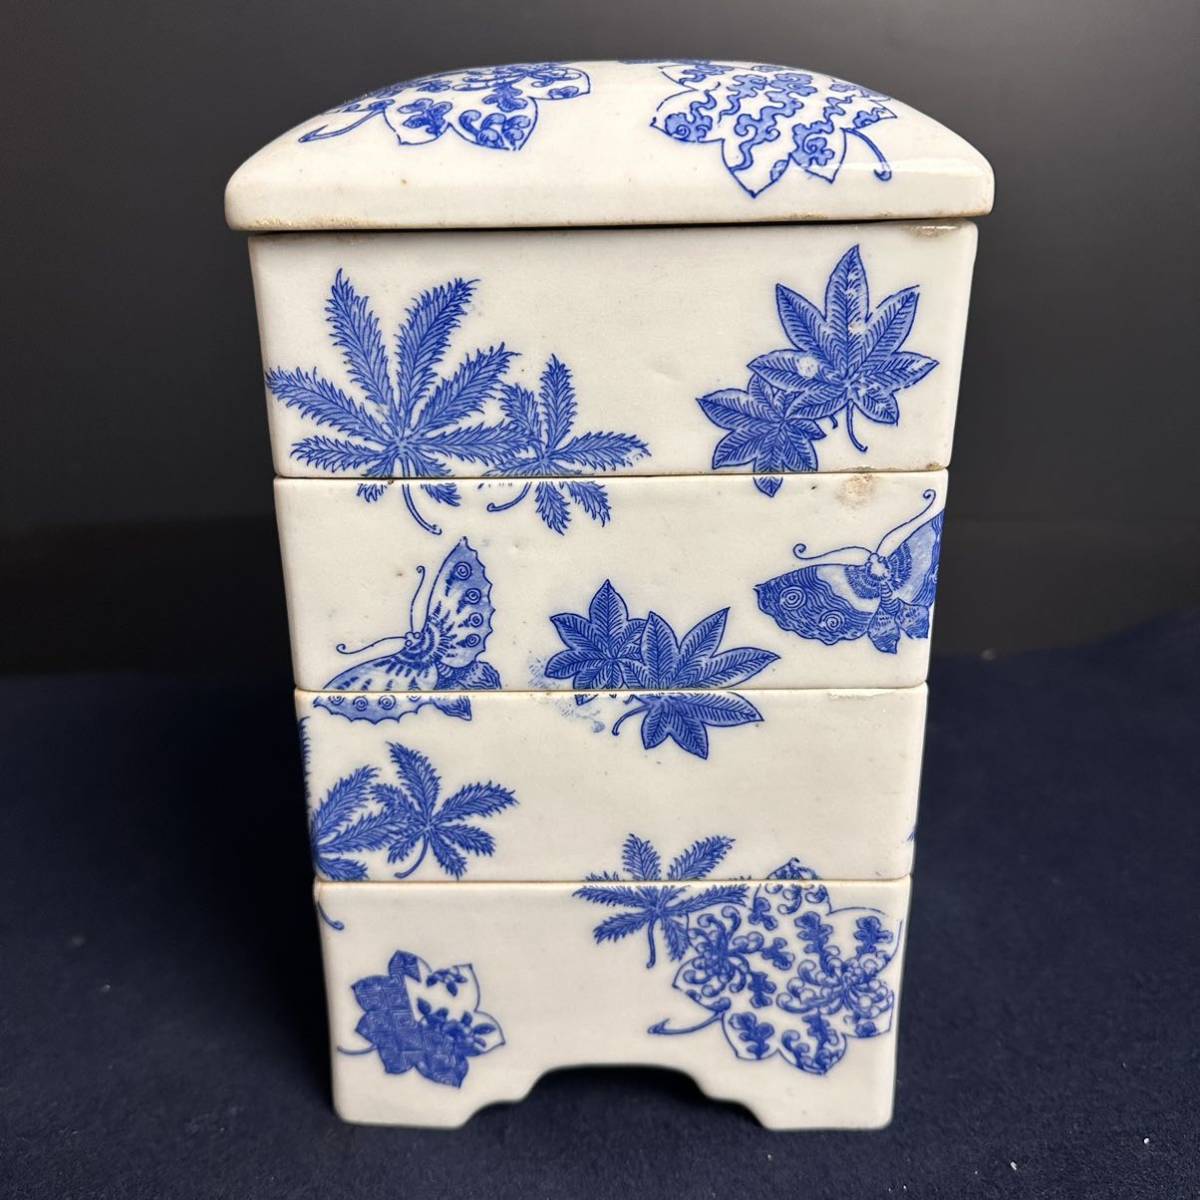 [KJ570] Imari blue and white ceramics multi-tiered food box four step -ply butterfly .. oseti New Year Japanese-style tableware antique old .